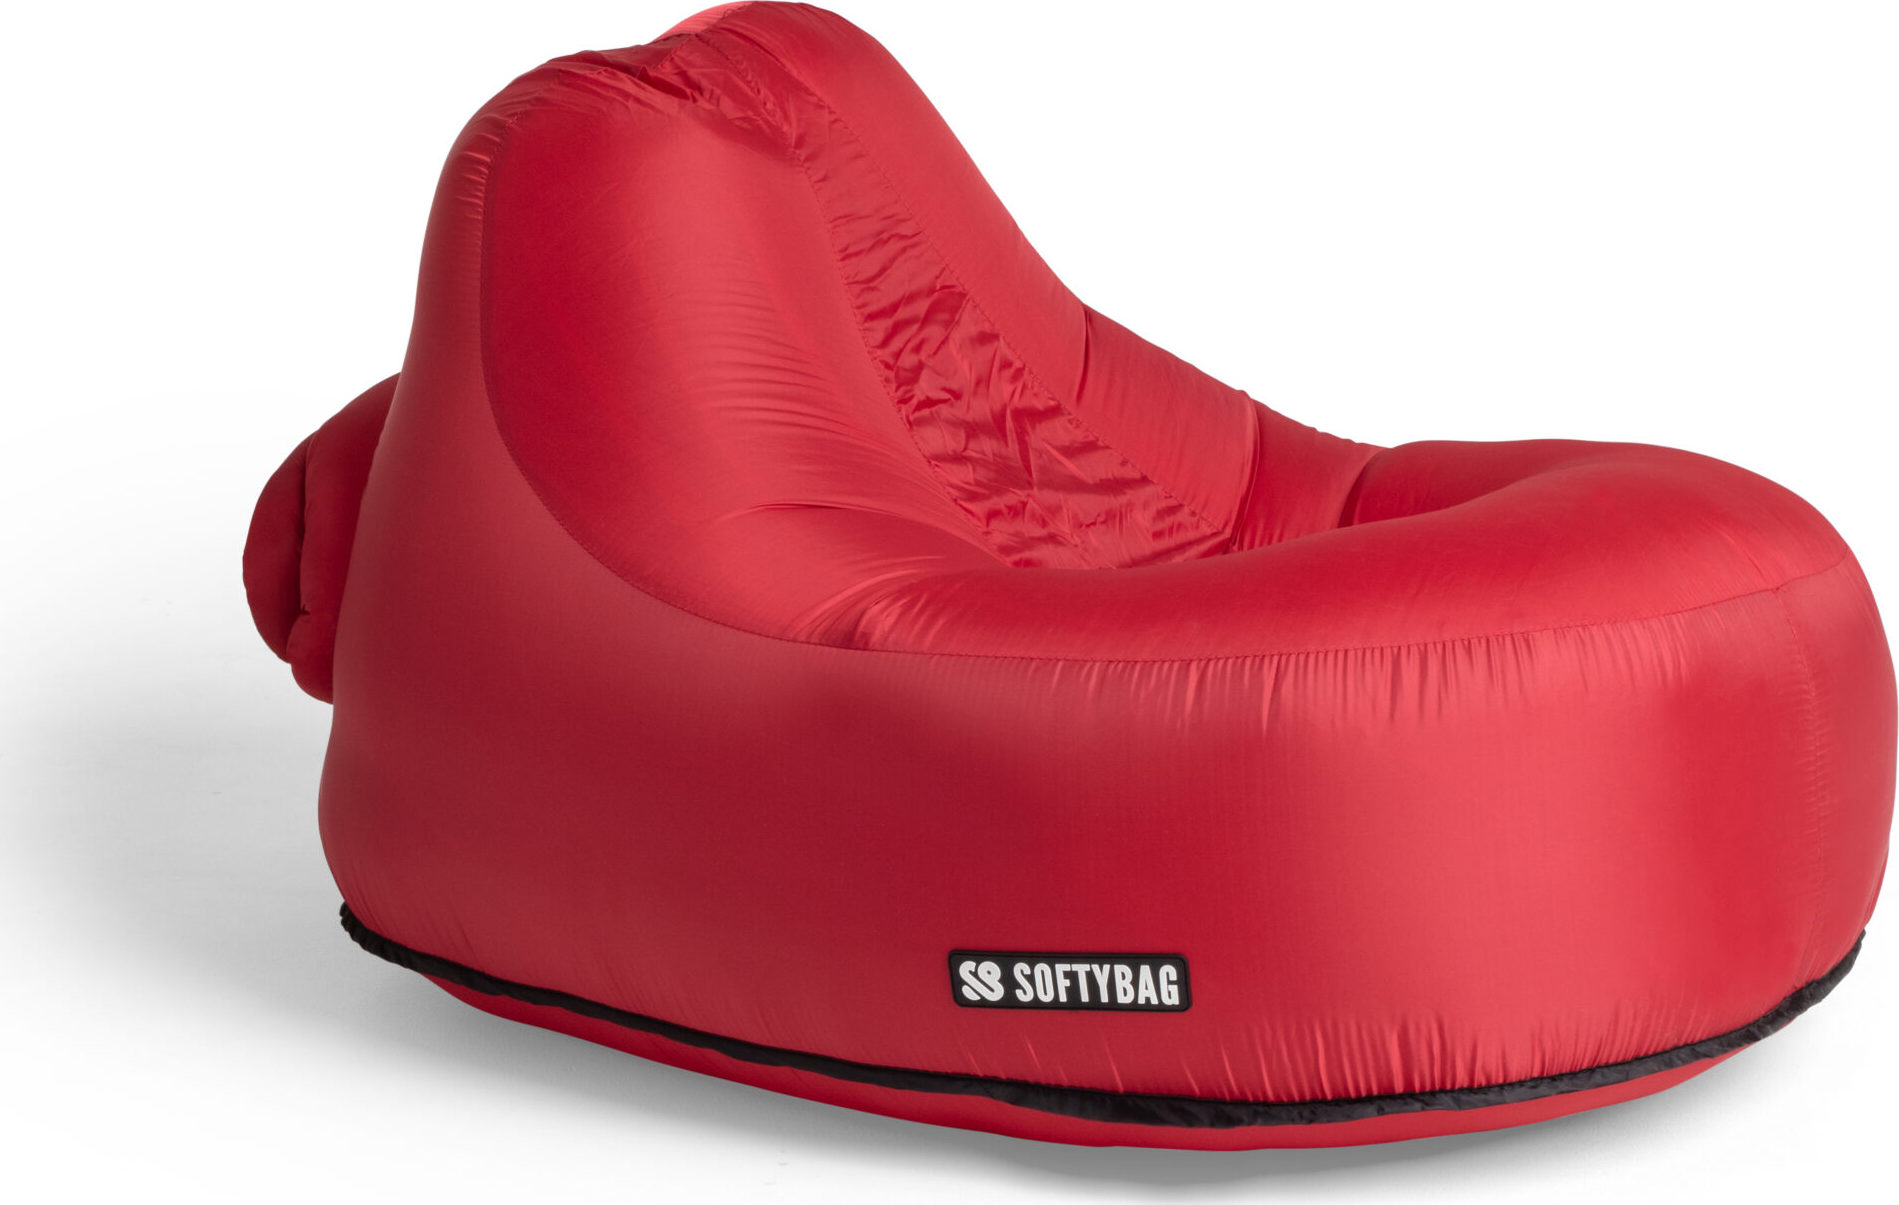 Softybag Chair Kids Chili Red OneSize, Chili Red